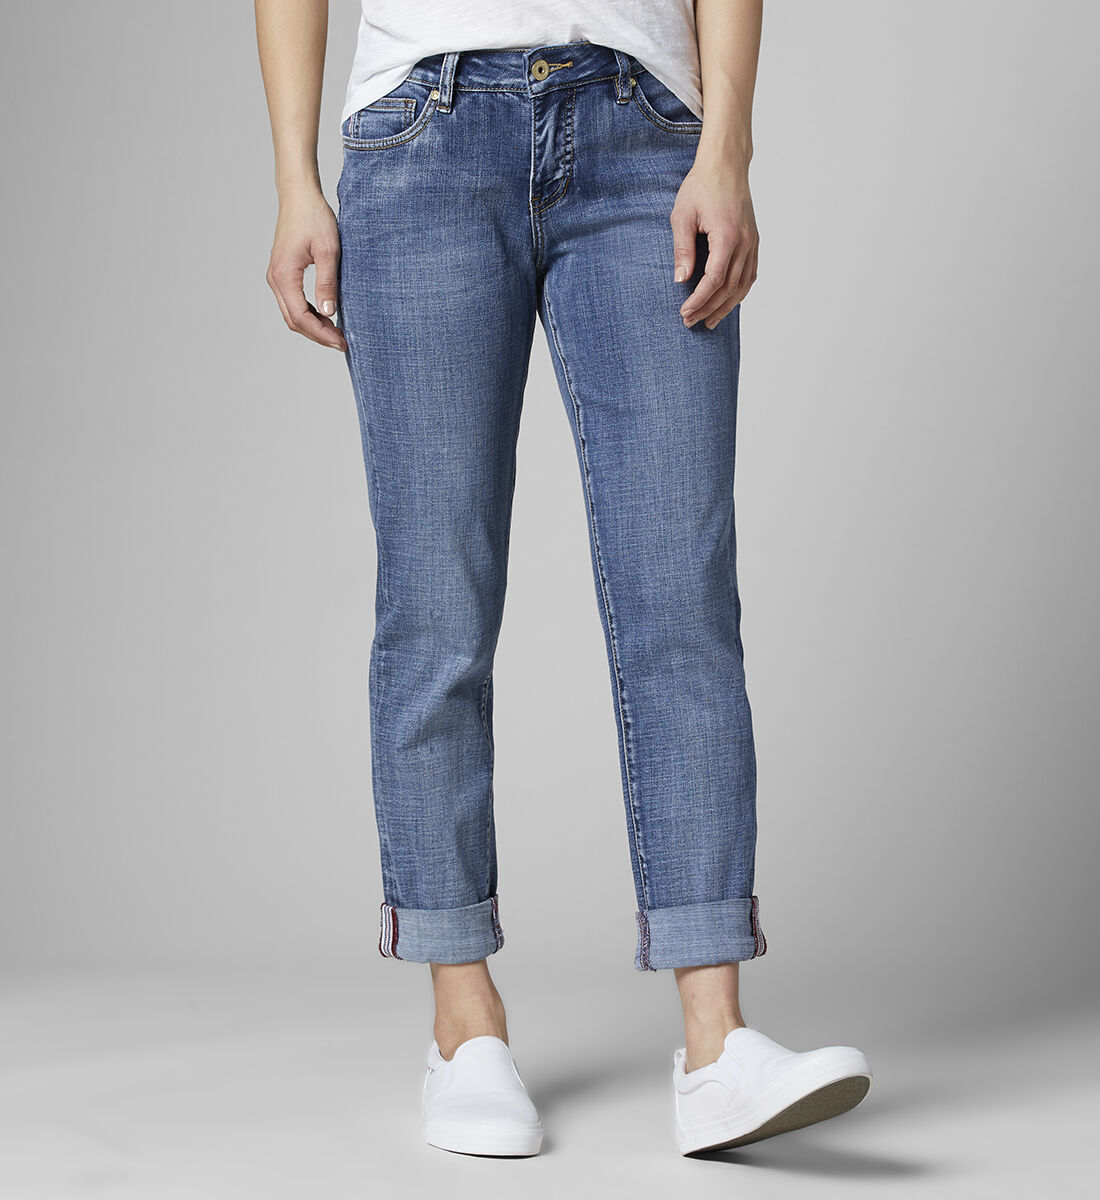 Buy Carter Mid Rise Girlfriend Jeans for USD 74.00 | Jag Jeans US New